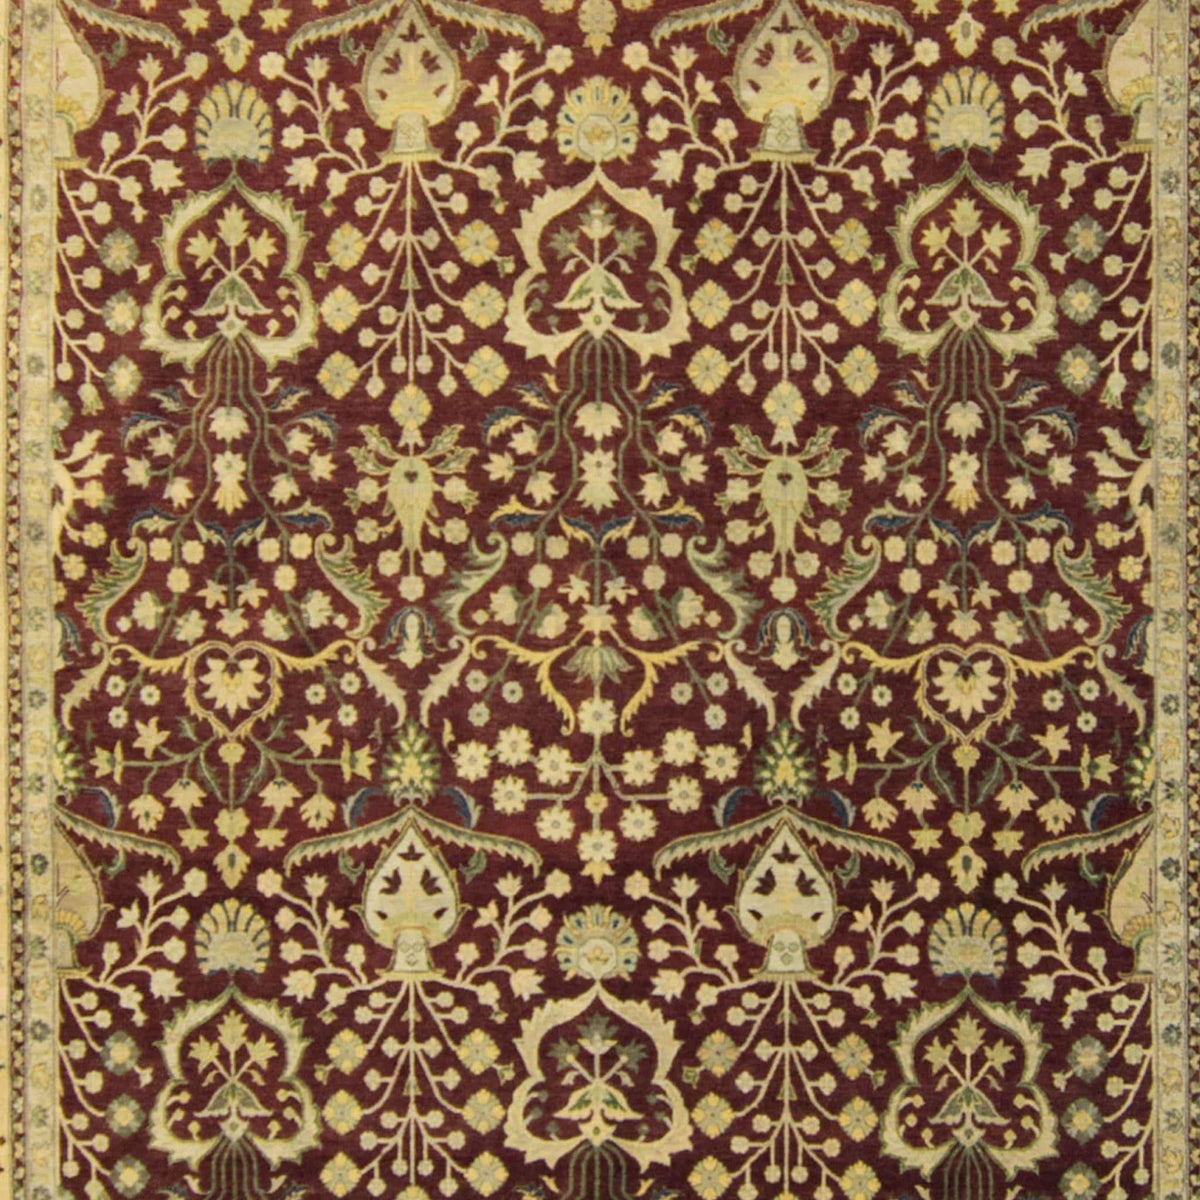 Fine Hand-knotted Wool Persian Rug 249cm x 320cm